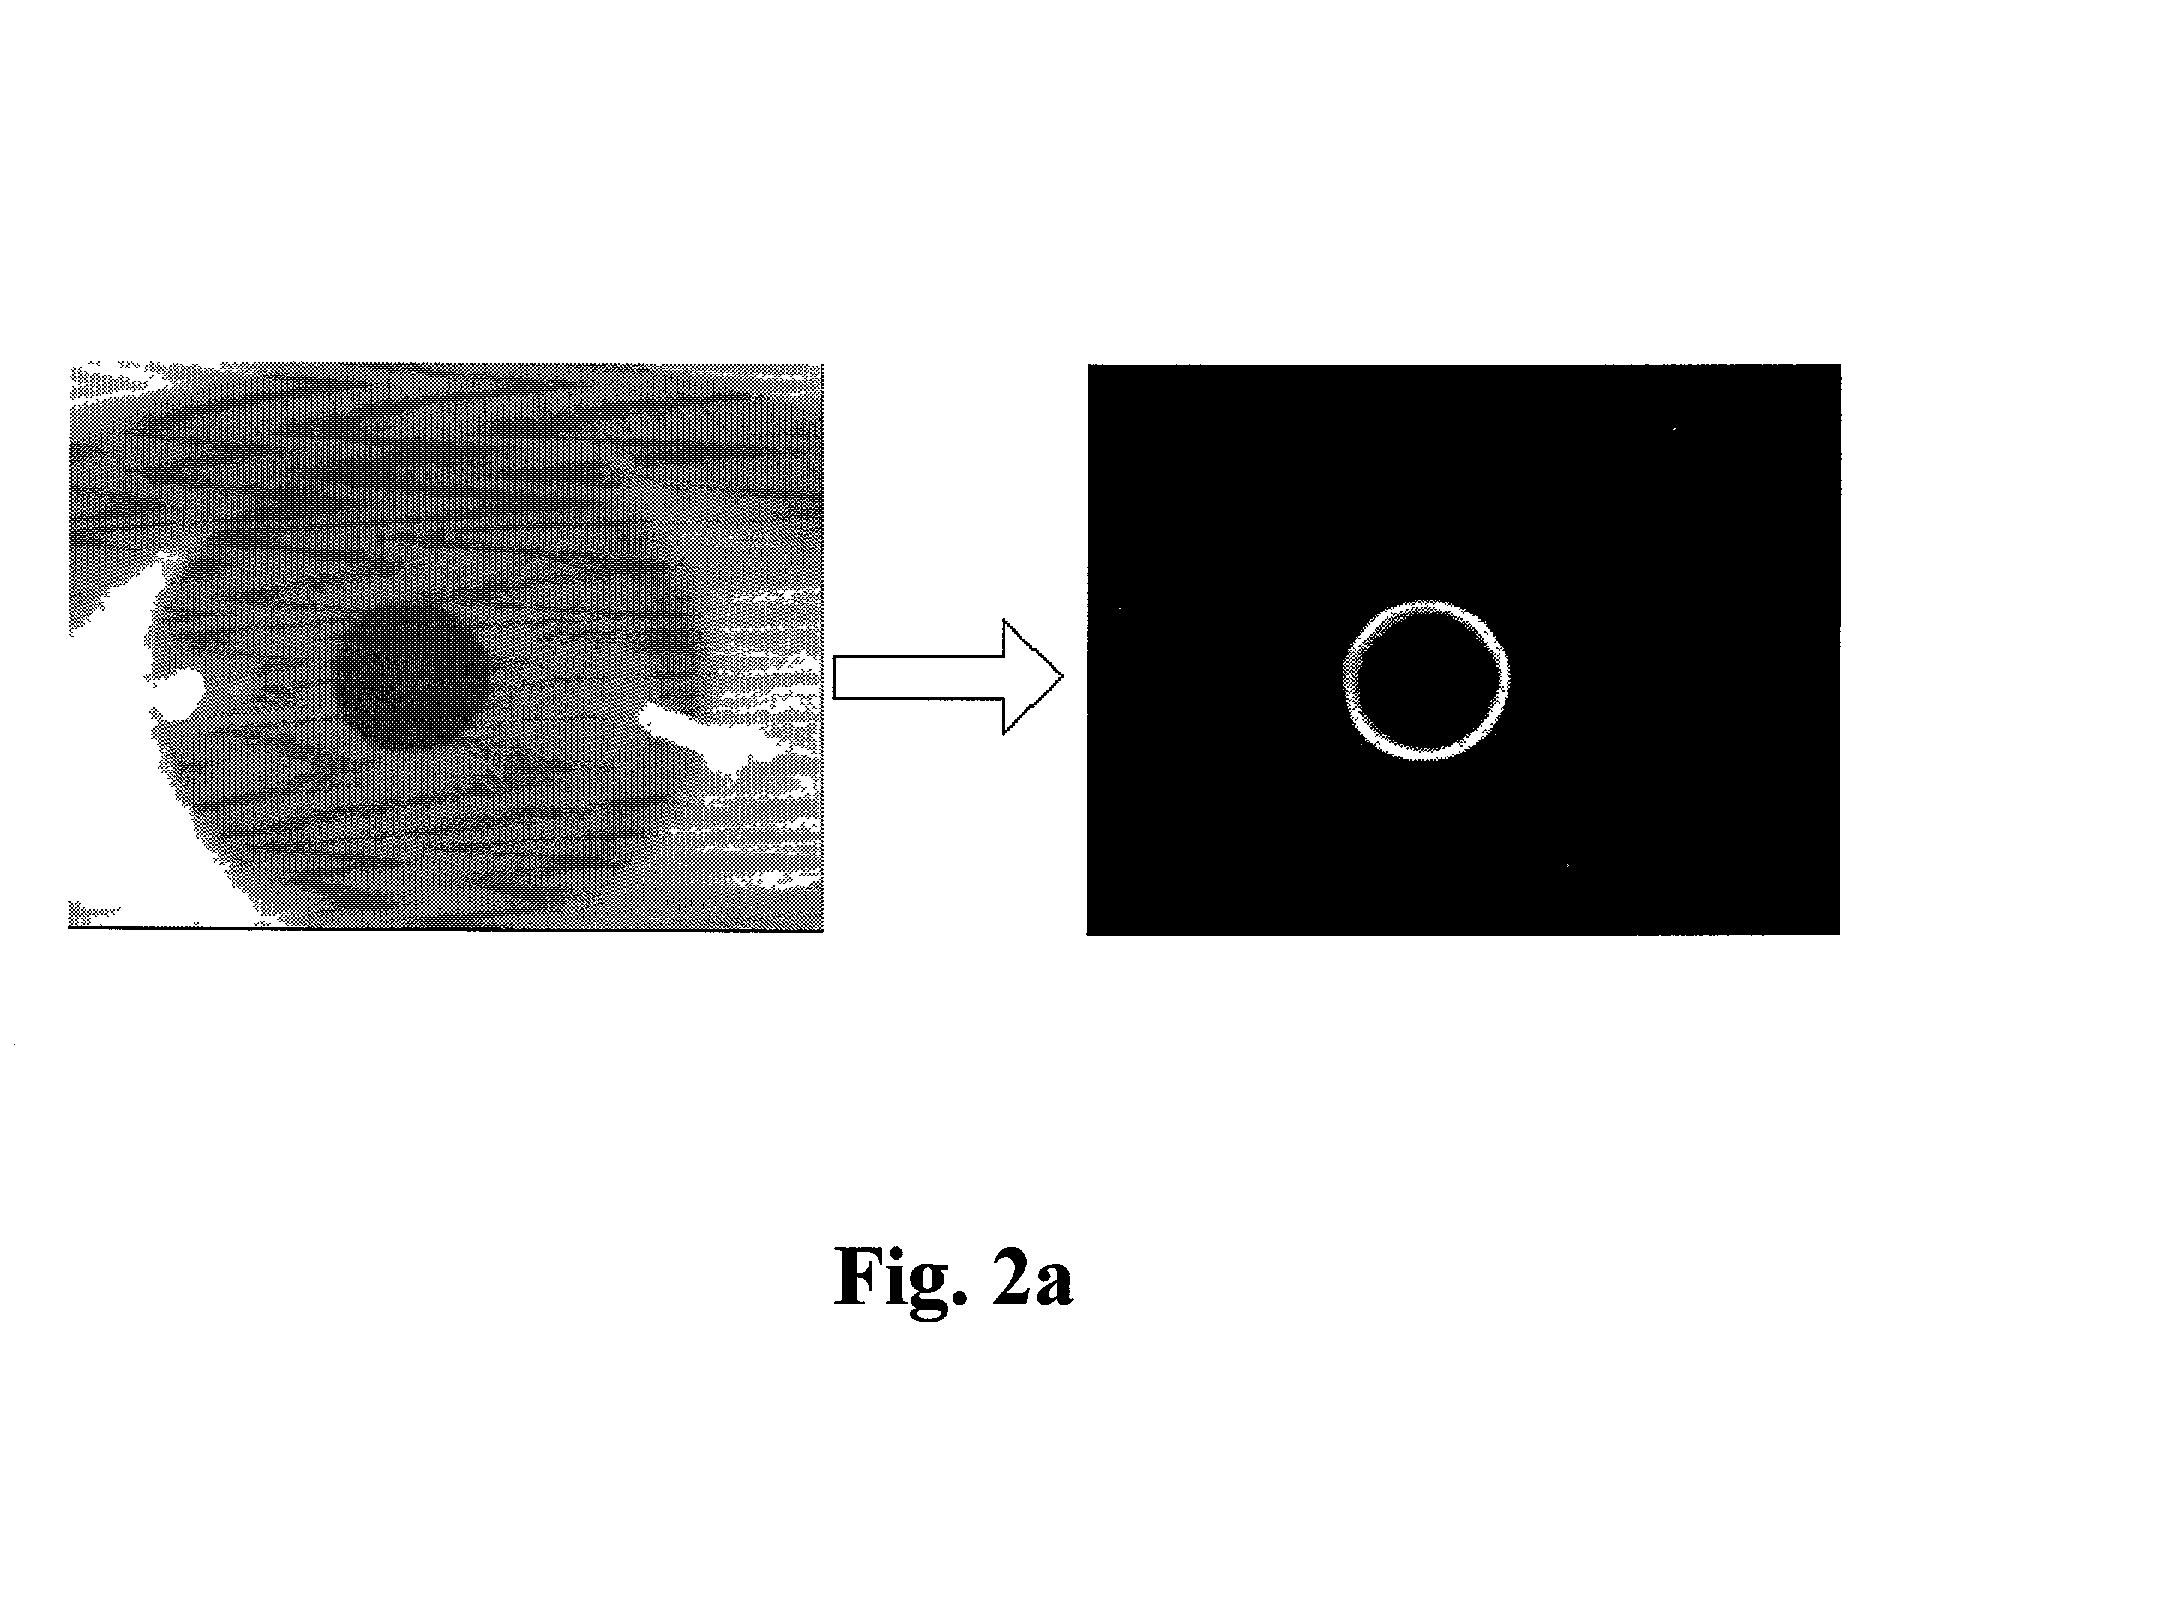 Non-contact type human iris recognition method for correcting a rotated iris image